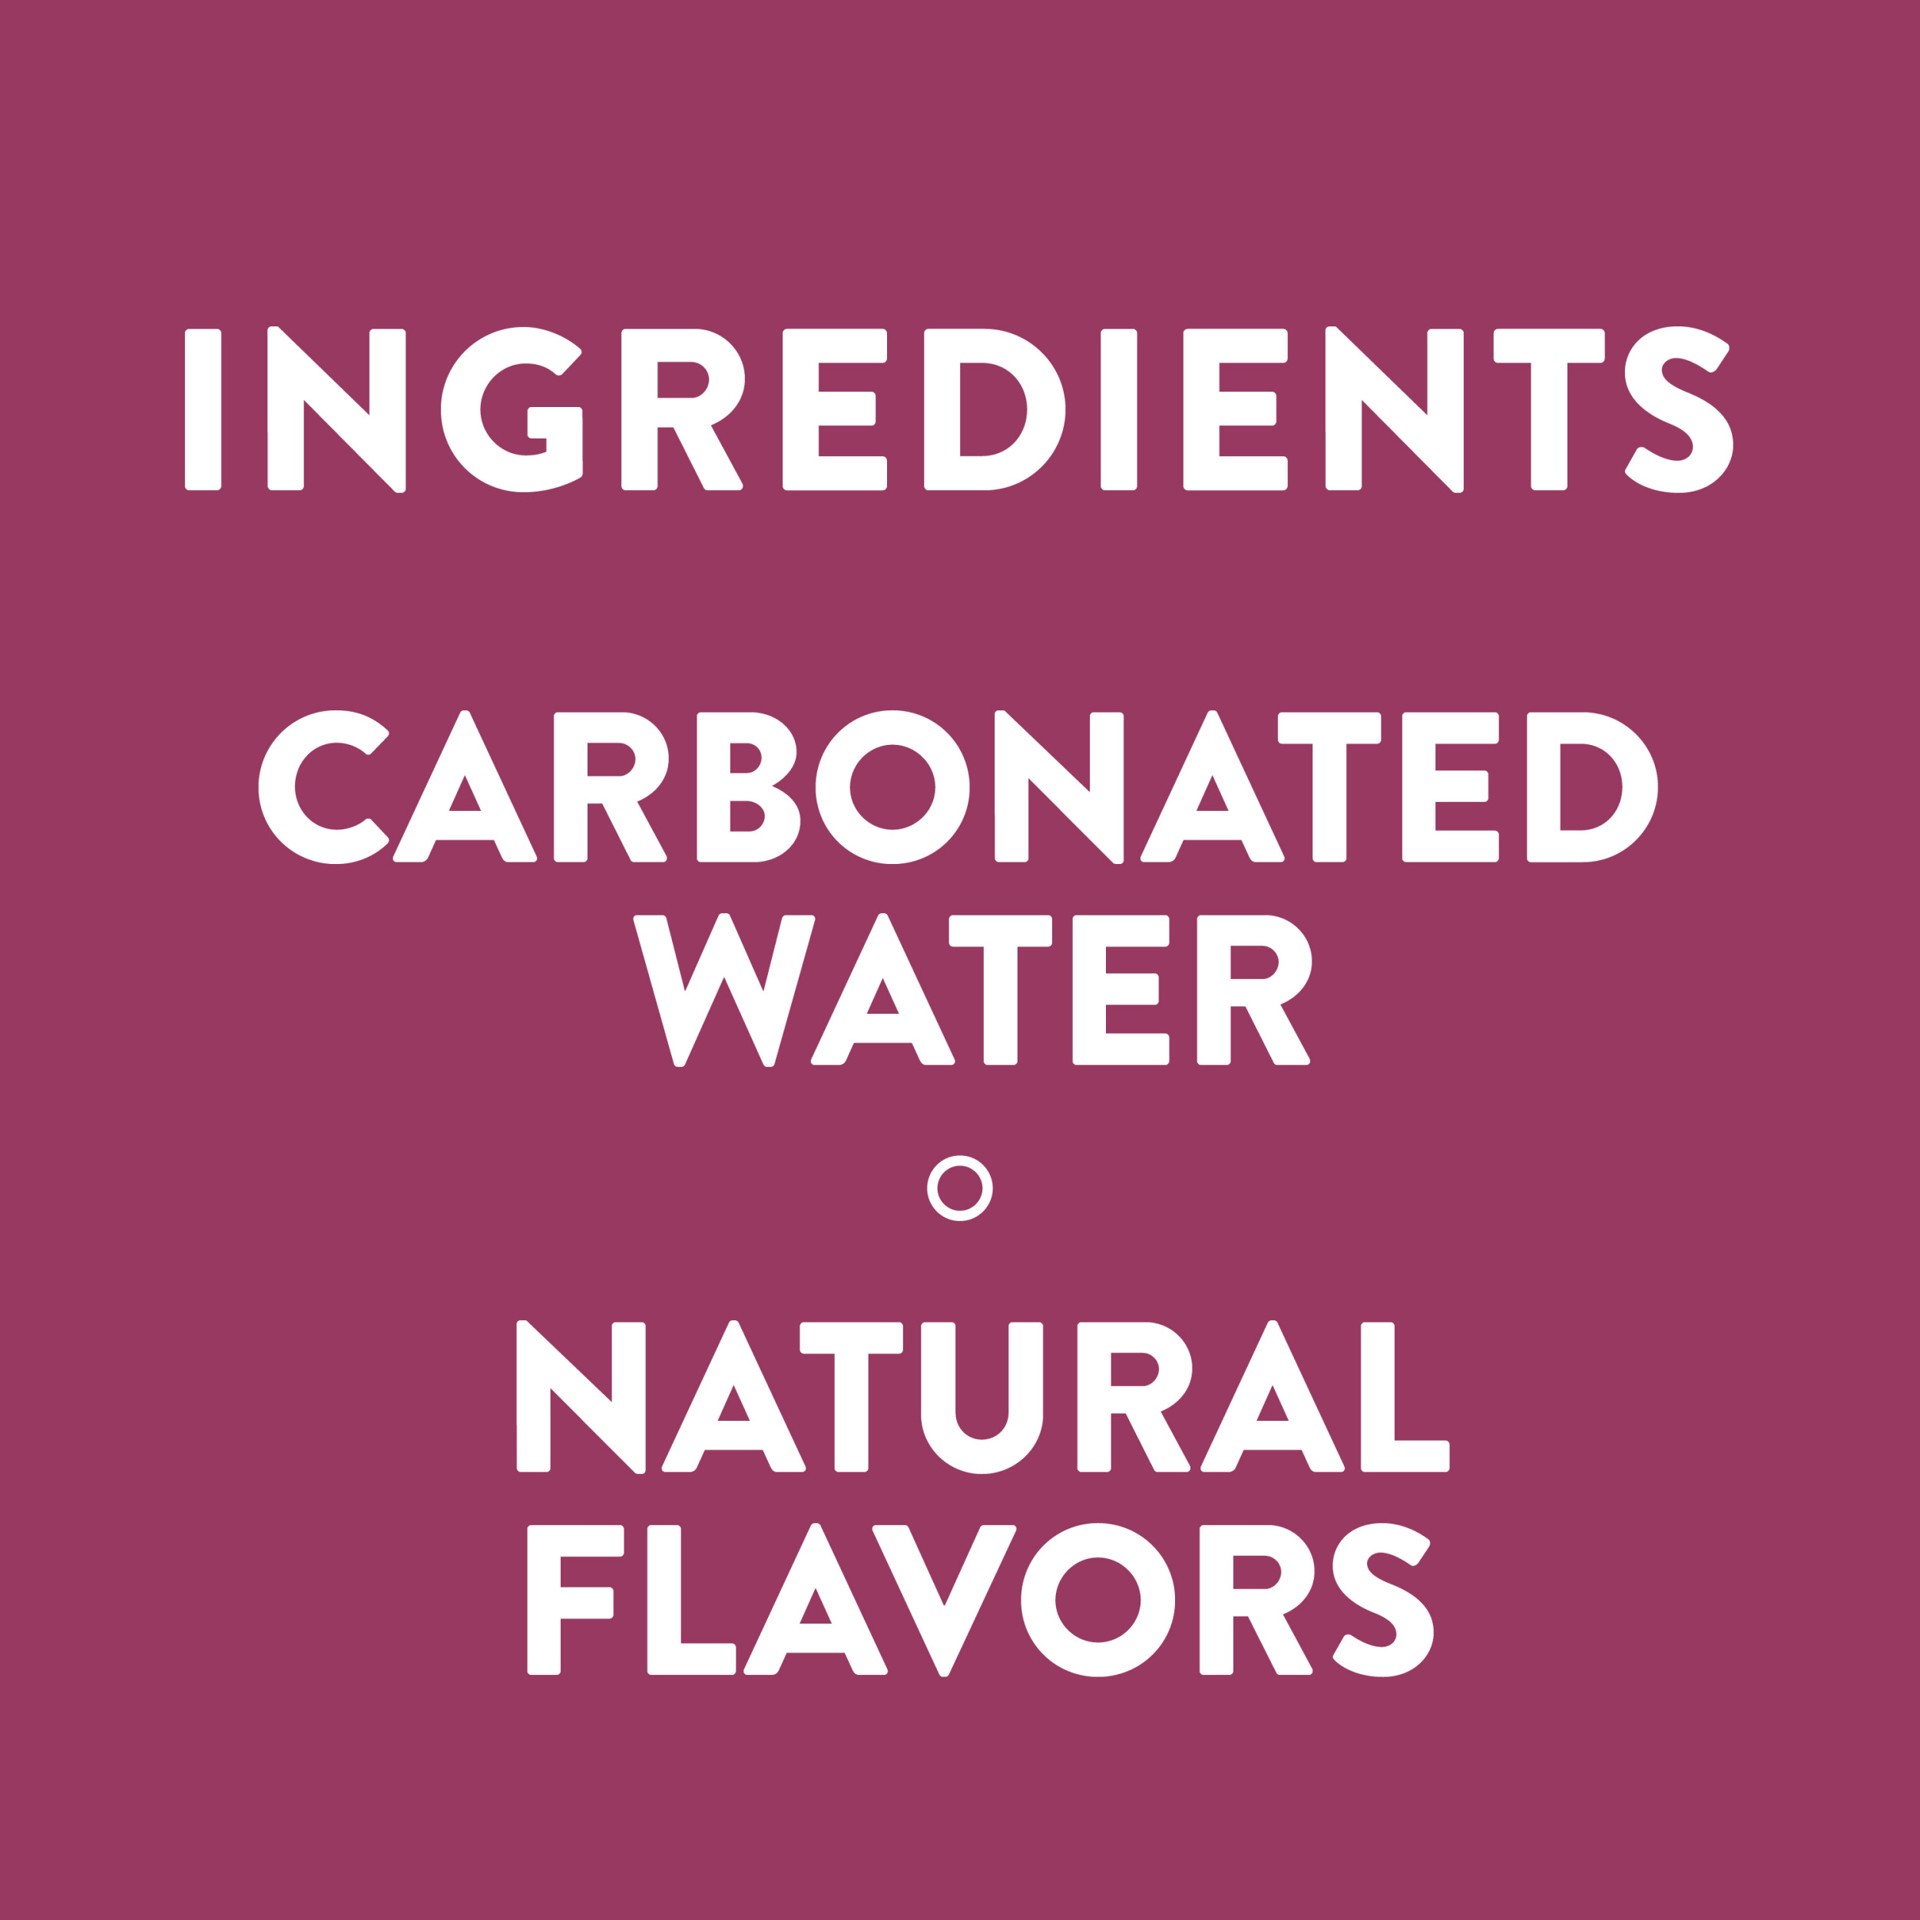 slide 9 of 10, AHA Sparkling Water, Black Cherry + Coffee Flavored Water, with Caffeine & Electrolytes, Zero Calories, Sodium Free, No Sweeteners, 12 fl oz, 8 Pack, 8 ct; 12 fl oz